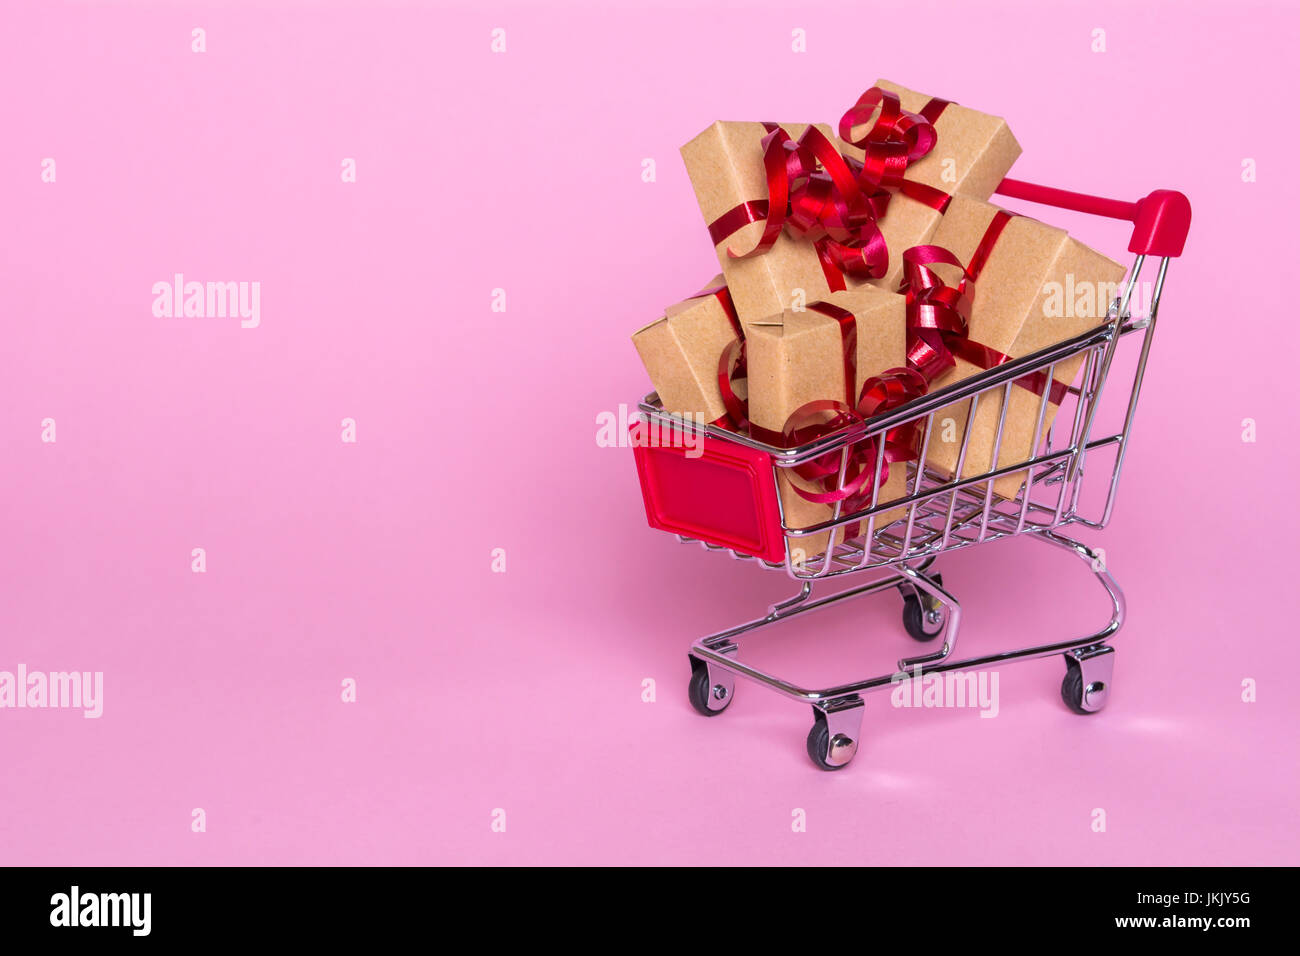 Creative concept with shopping trolley with gifts on a pink background. Gifts wrapped in kraft paper with a red ribbon and bow. Stock Photo